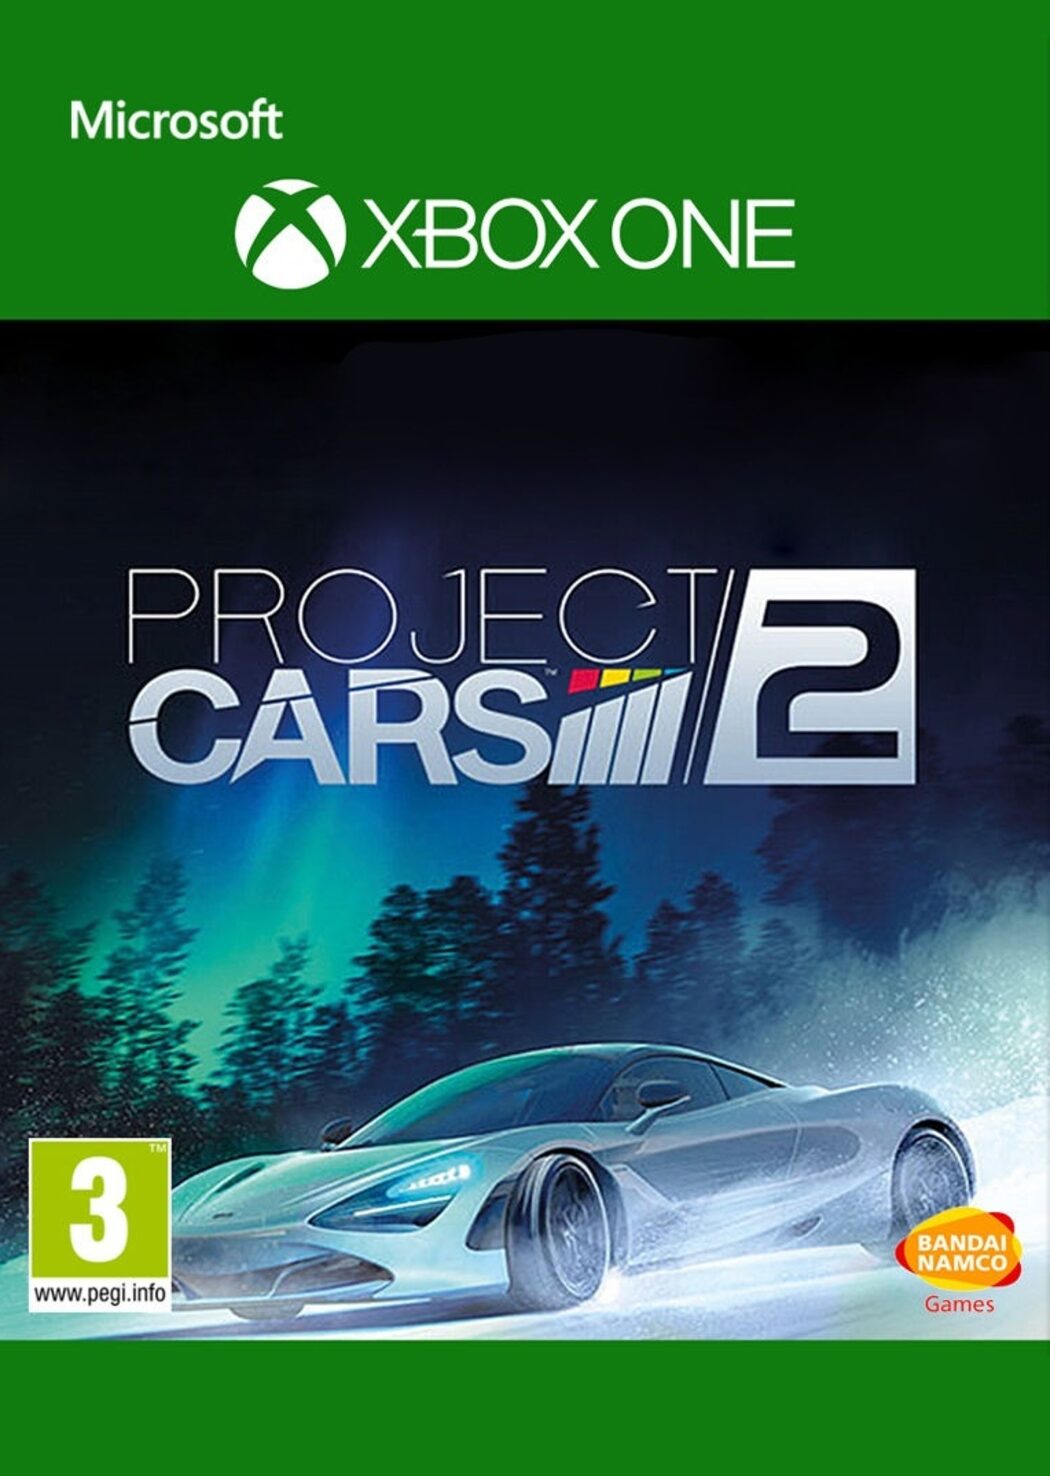 Cheap Project CARS key codes – and purchase! | ENEBA